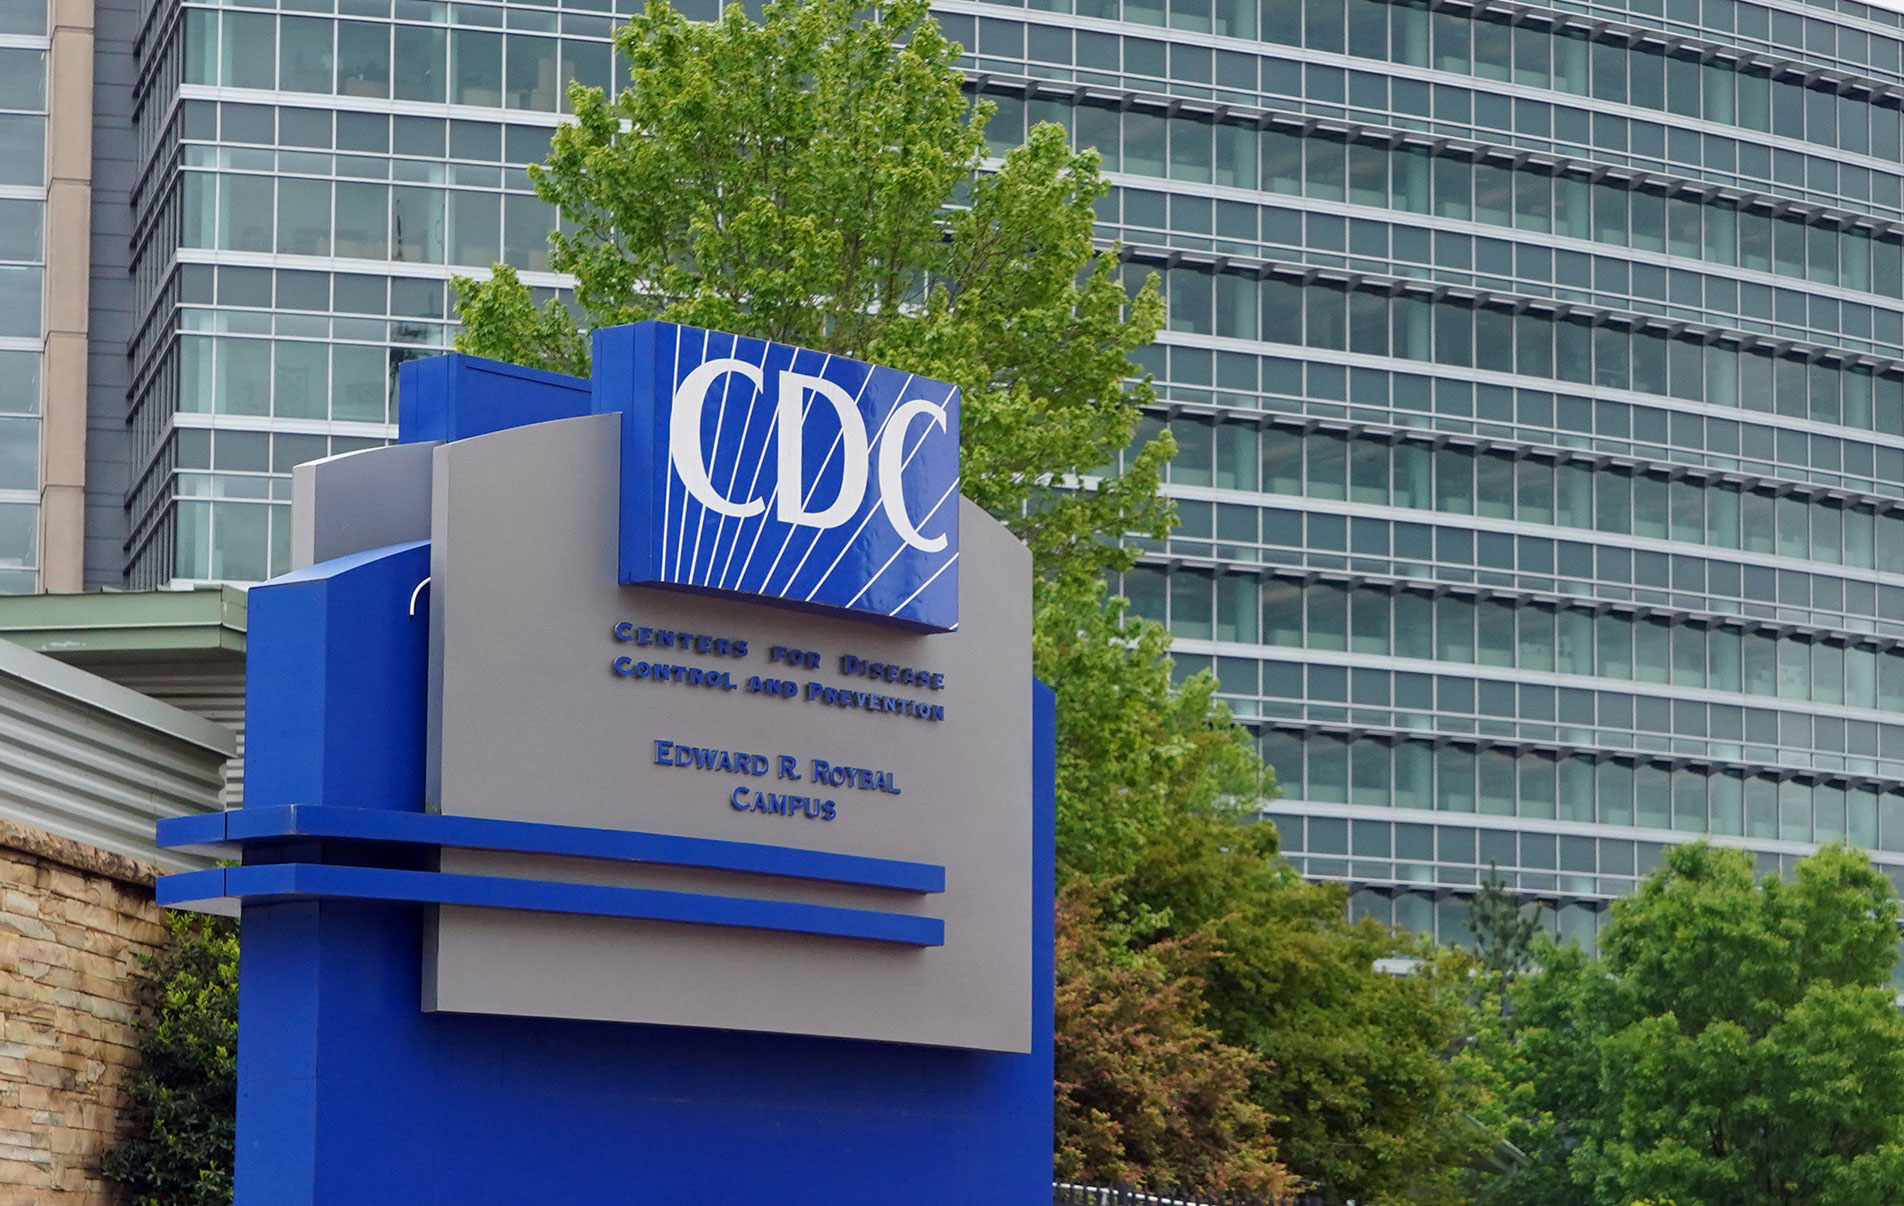 The CDC has been the lead agency in battling other recent pandemics and disease outbreaks.